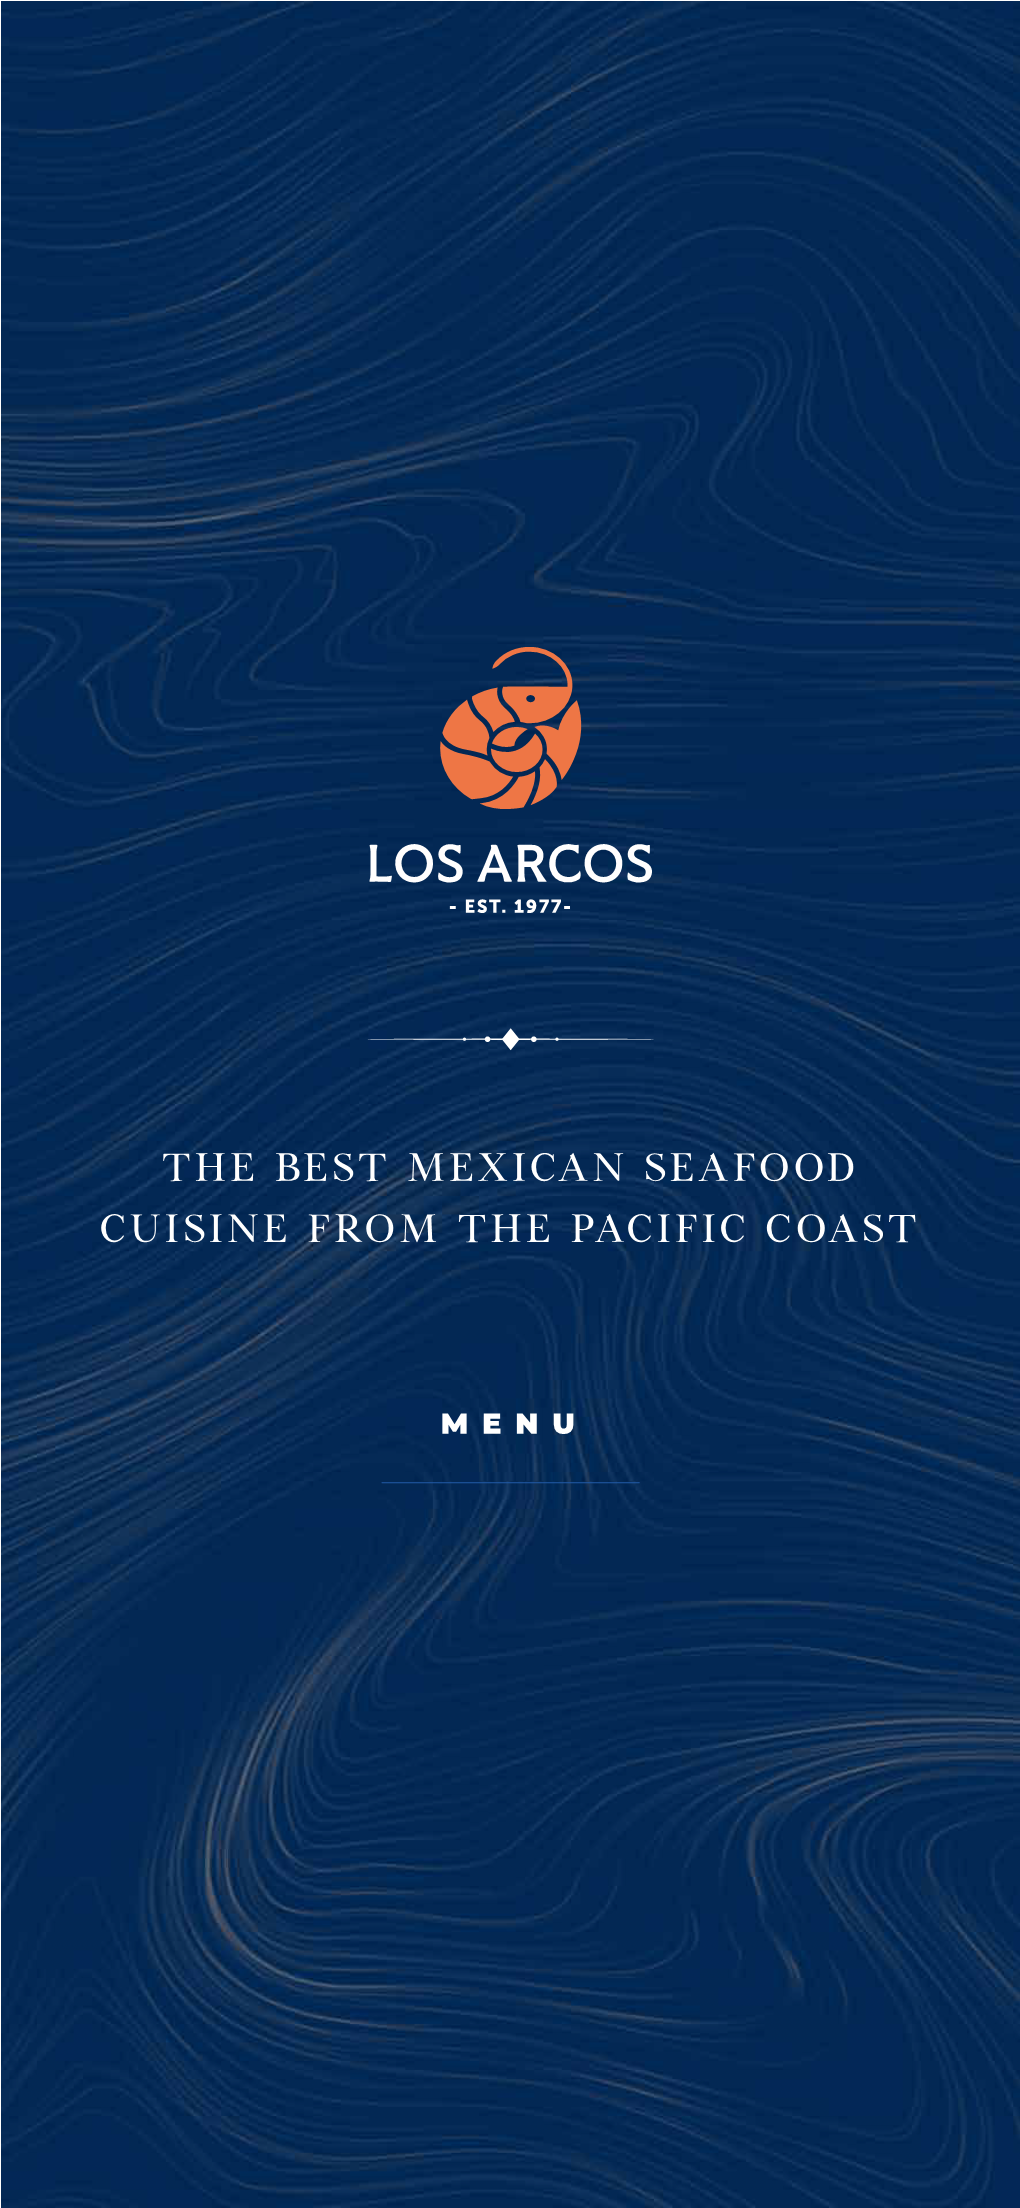 The Best Mexican Seafood Cuisine from the Pacific Coast